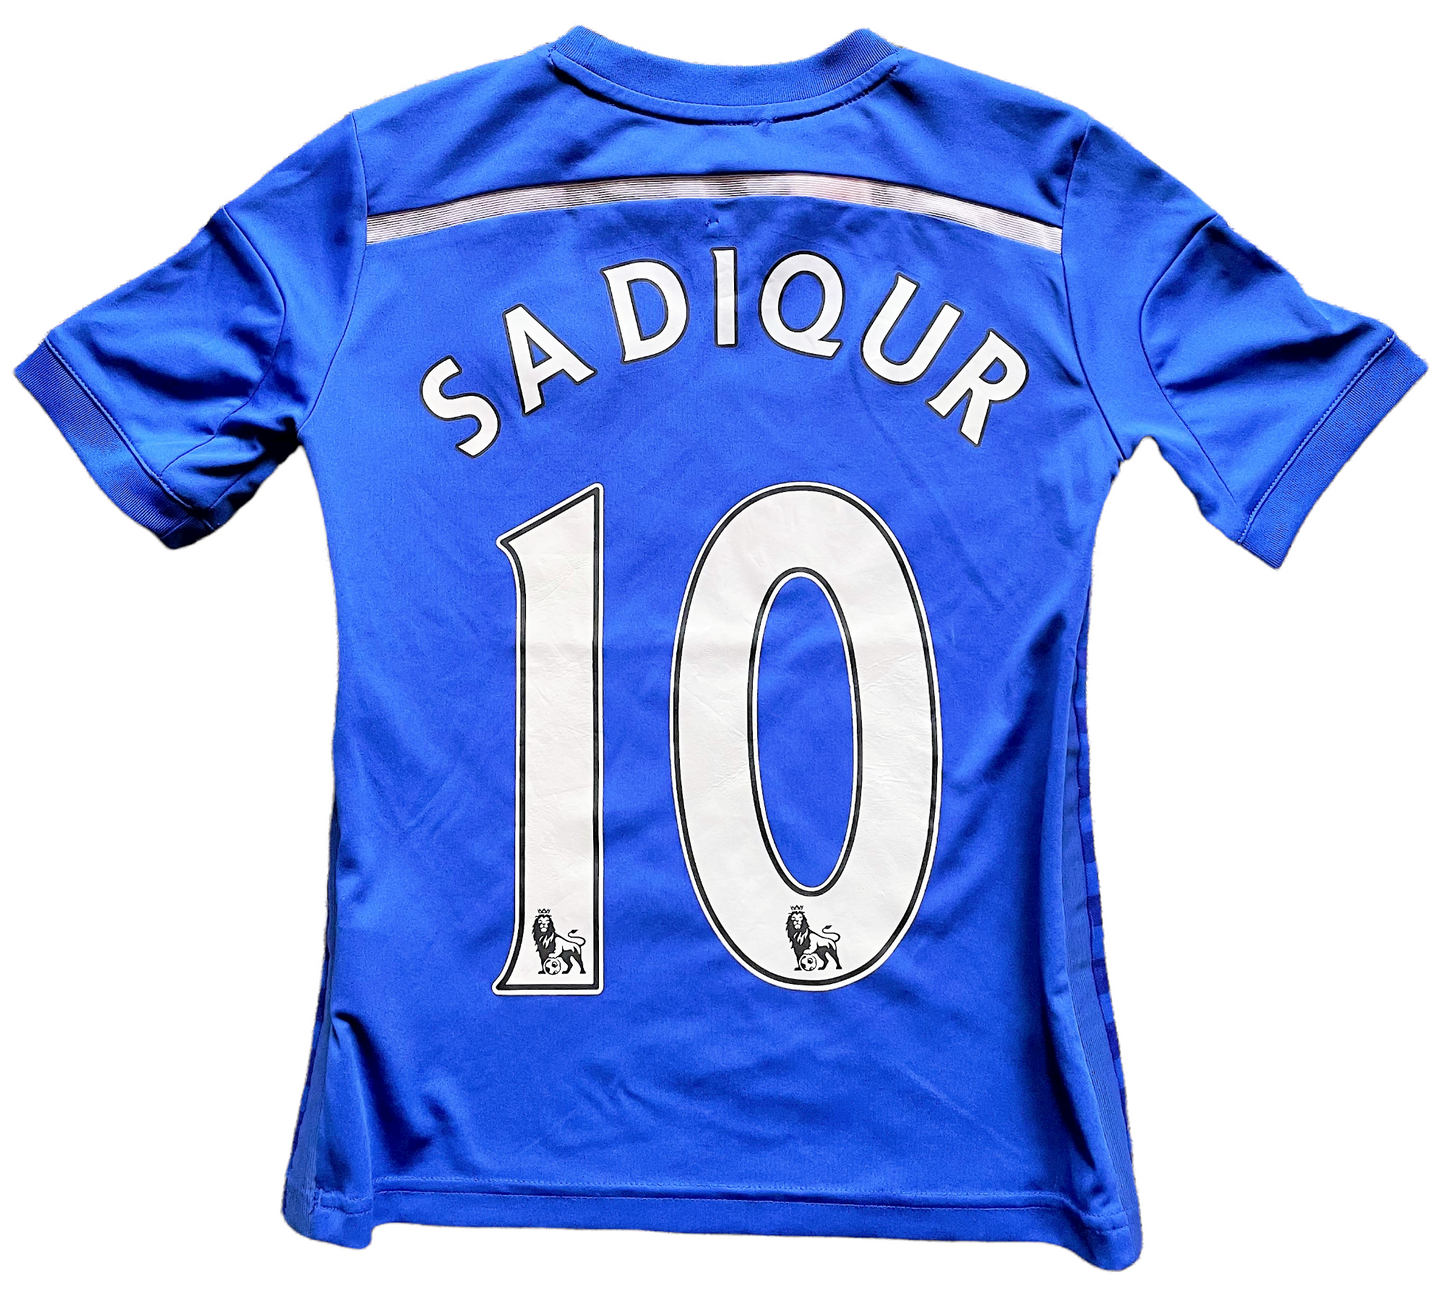 Chelsea 2014 Home Shirt (good) Age 9 to 10. Height 18 inches